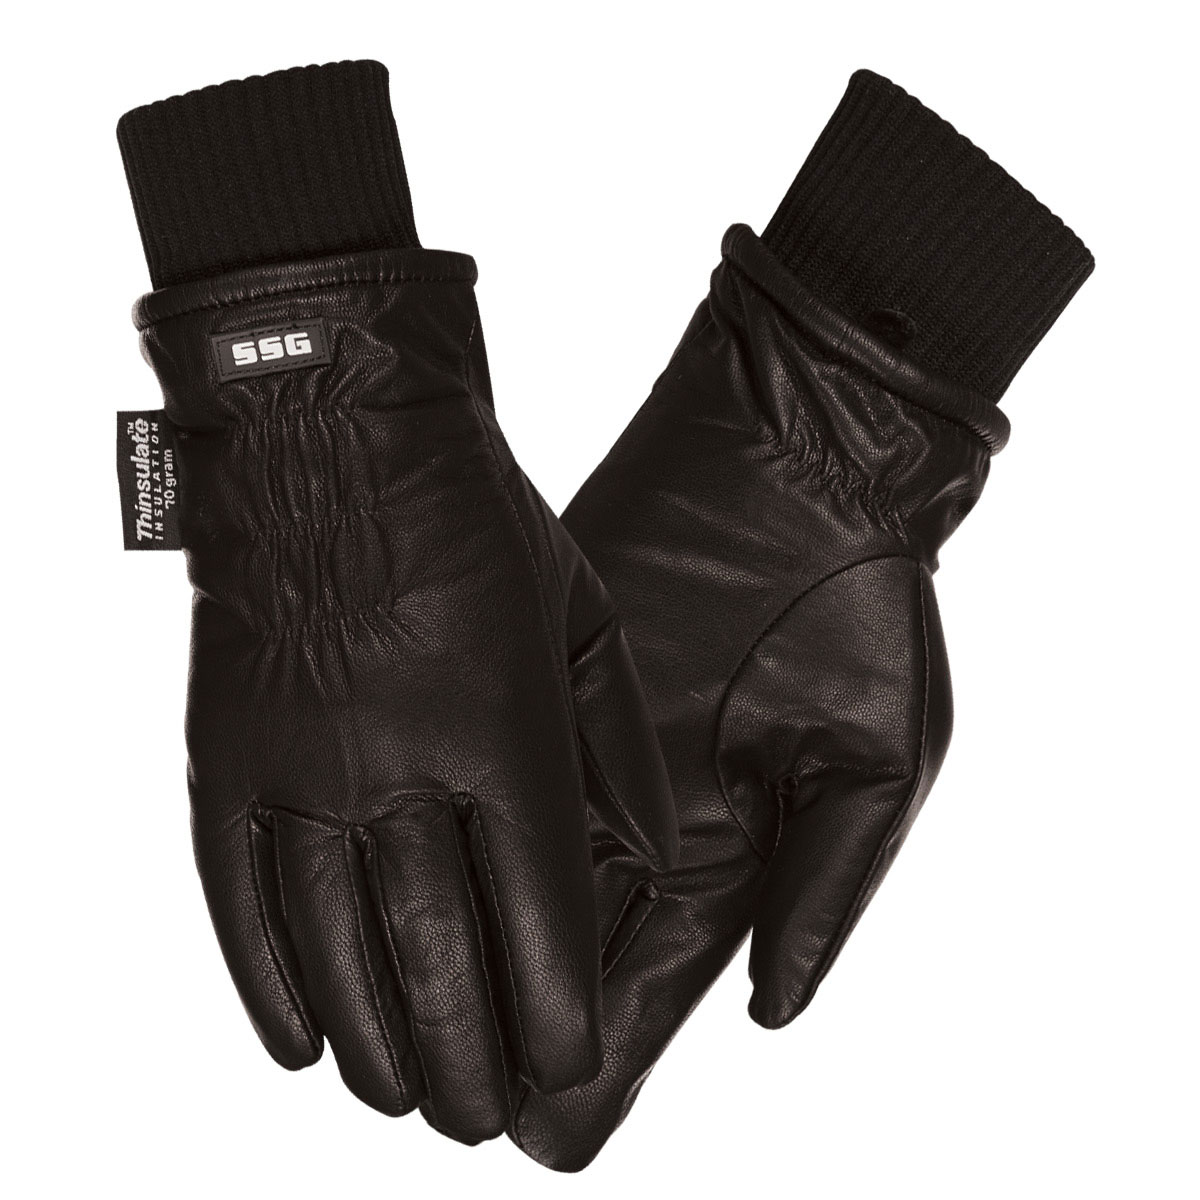 Black, Ladies 7/8 SSG All Weather Gloves ♦ Durable Breathable Washable Most Popular ♦ All Sizes and Colors 